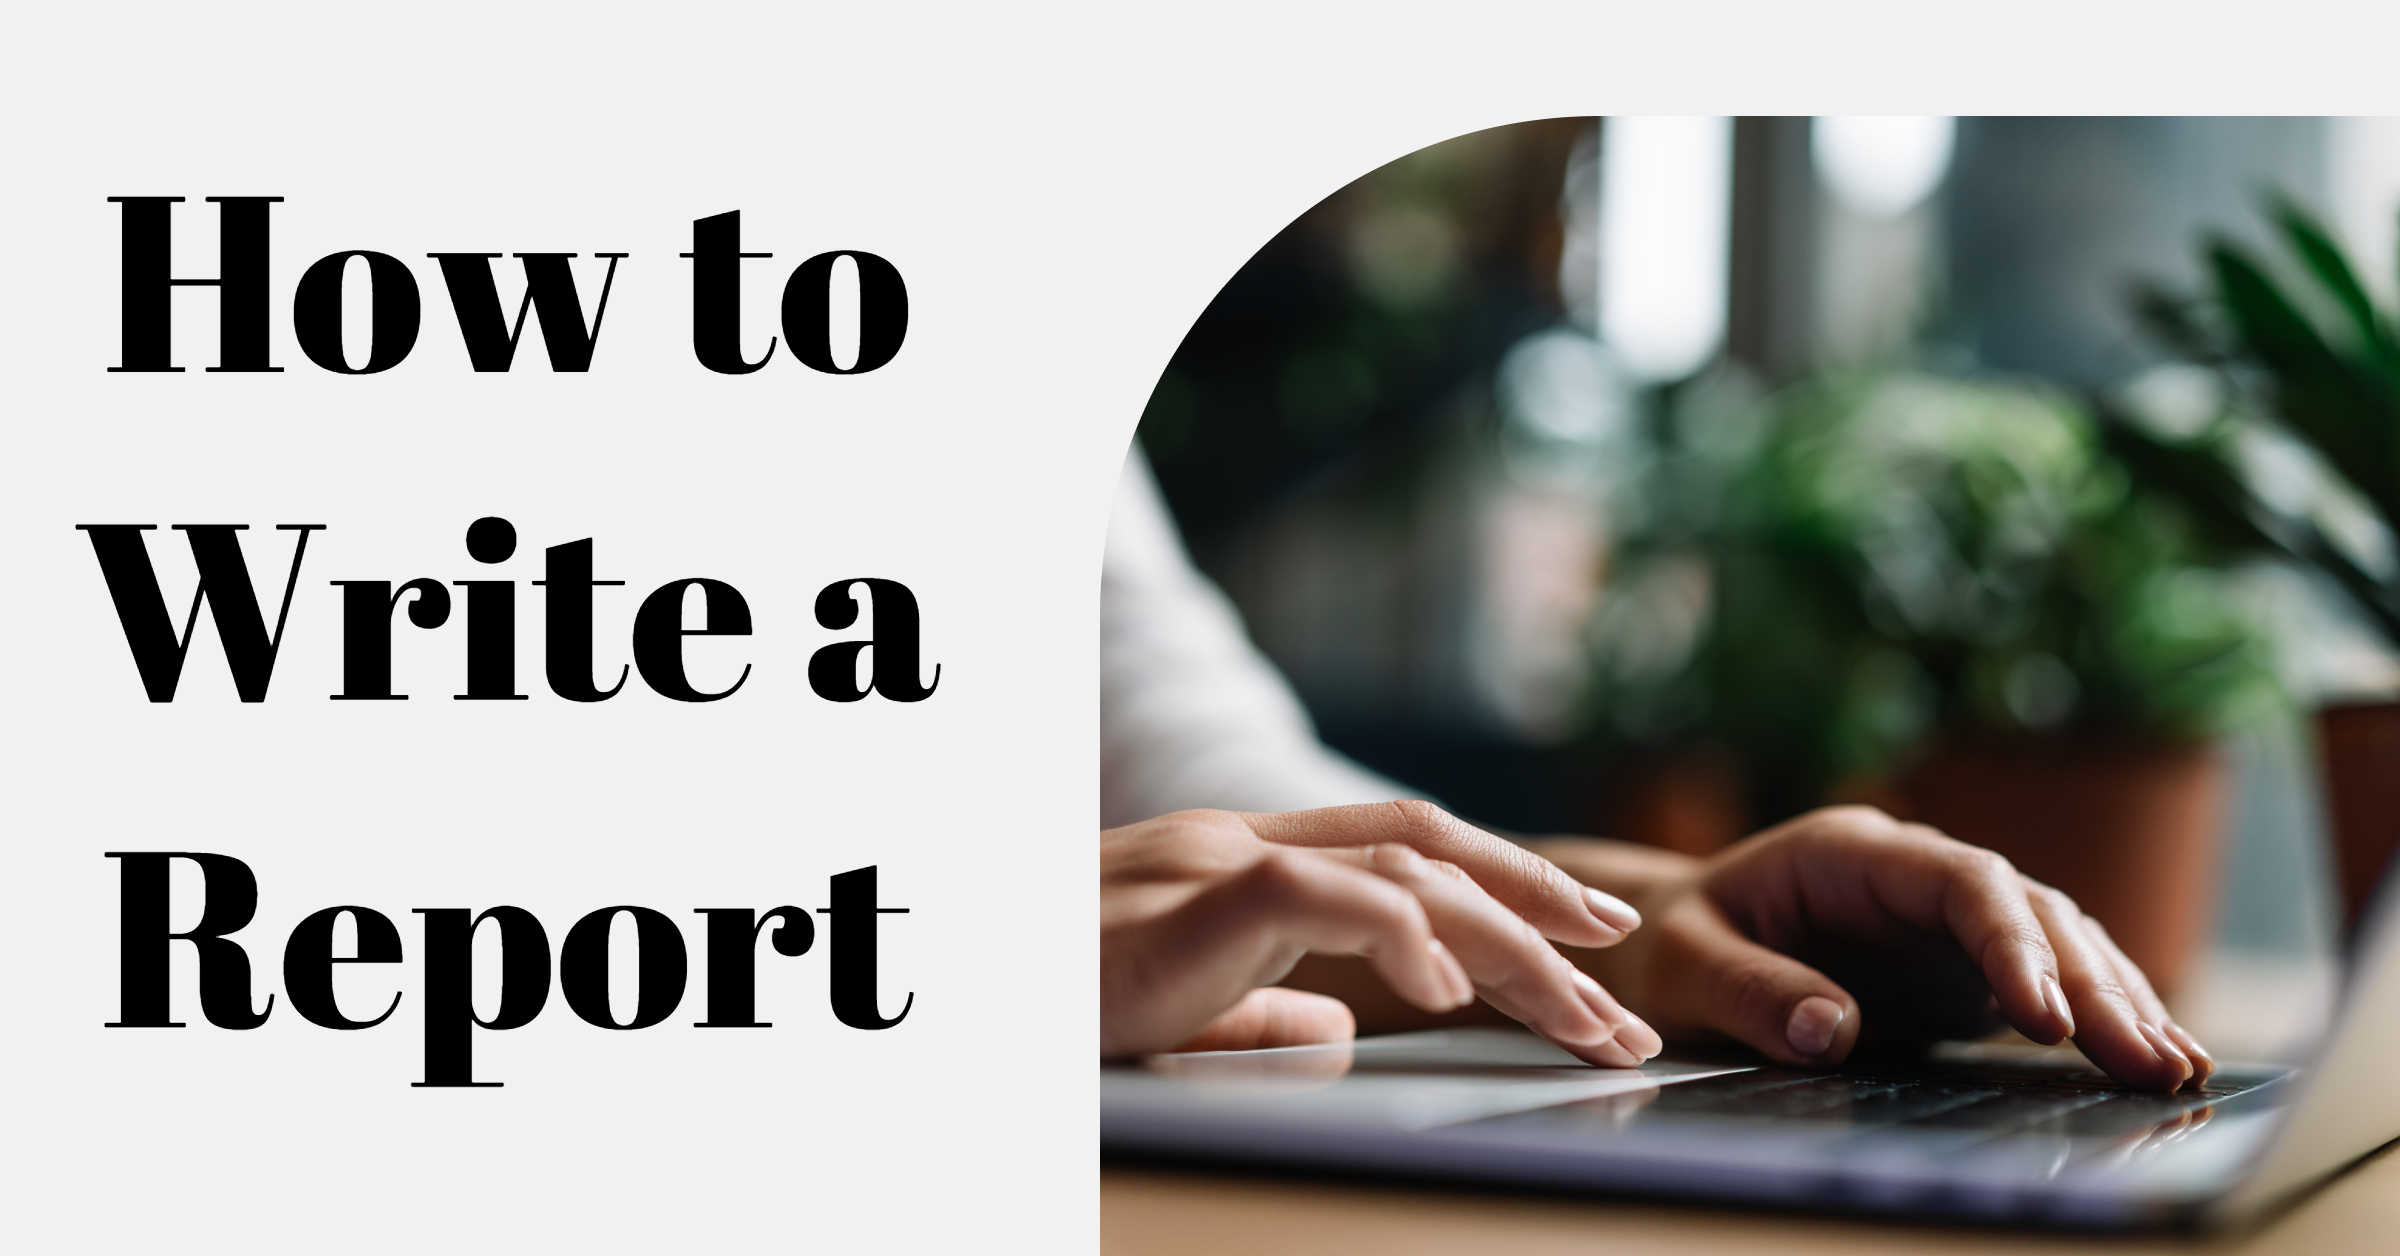 How to Write a Report